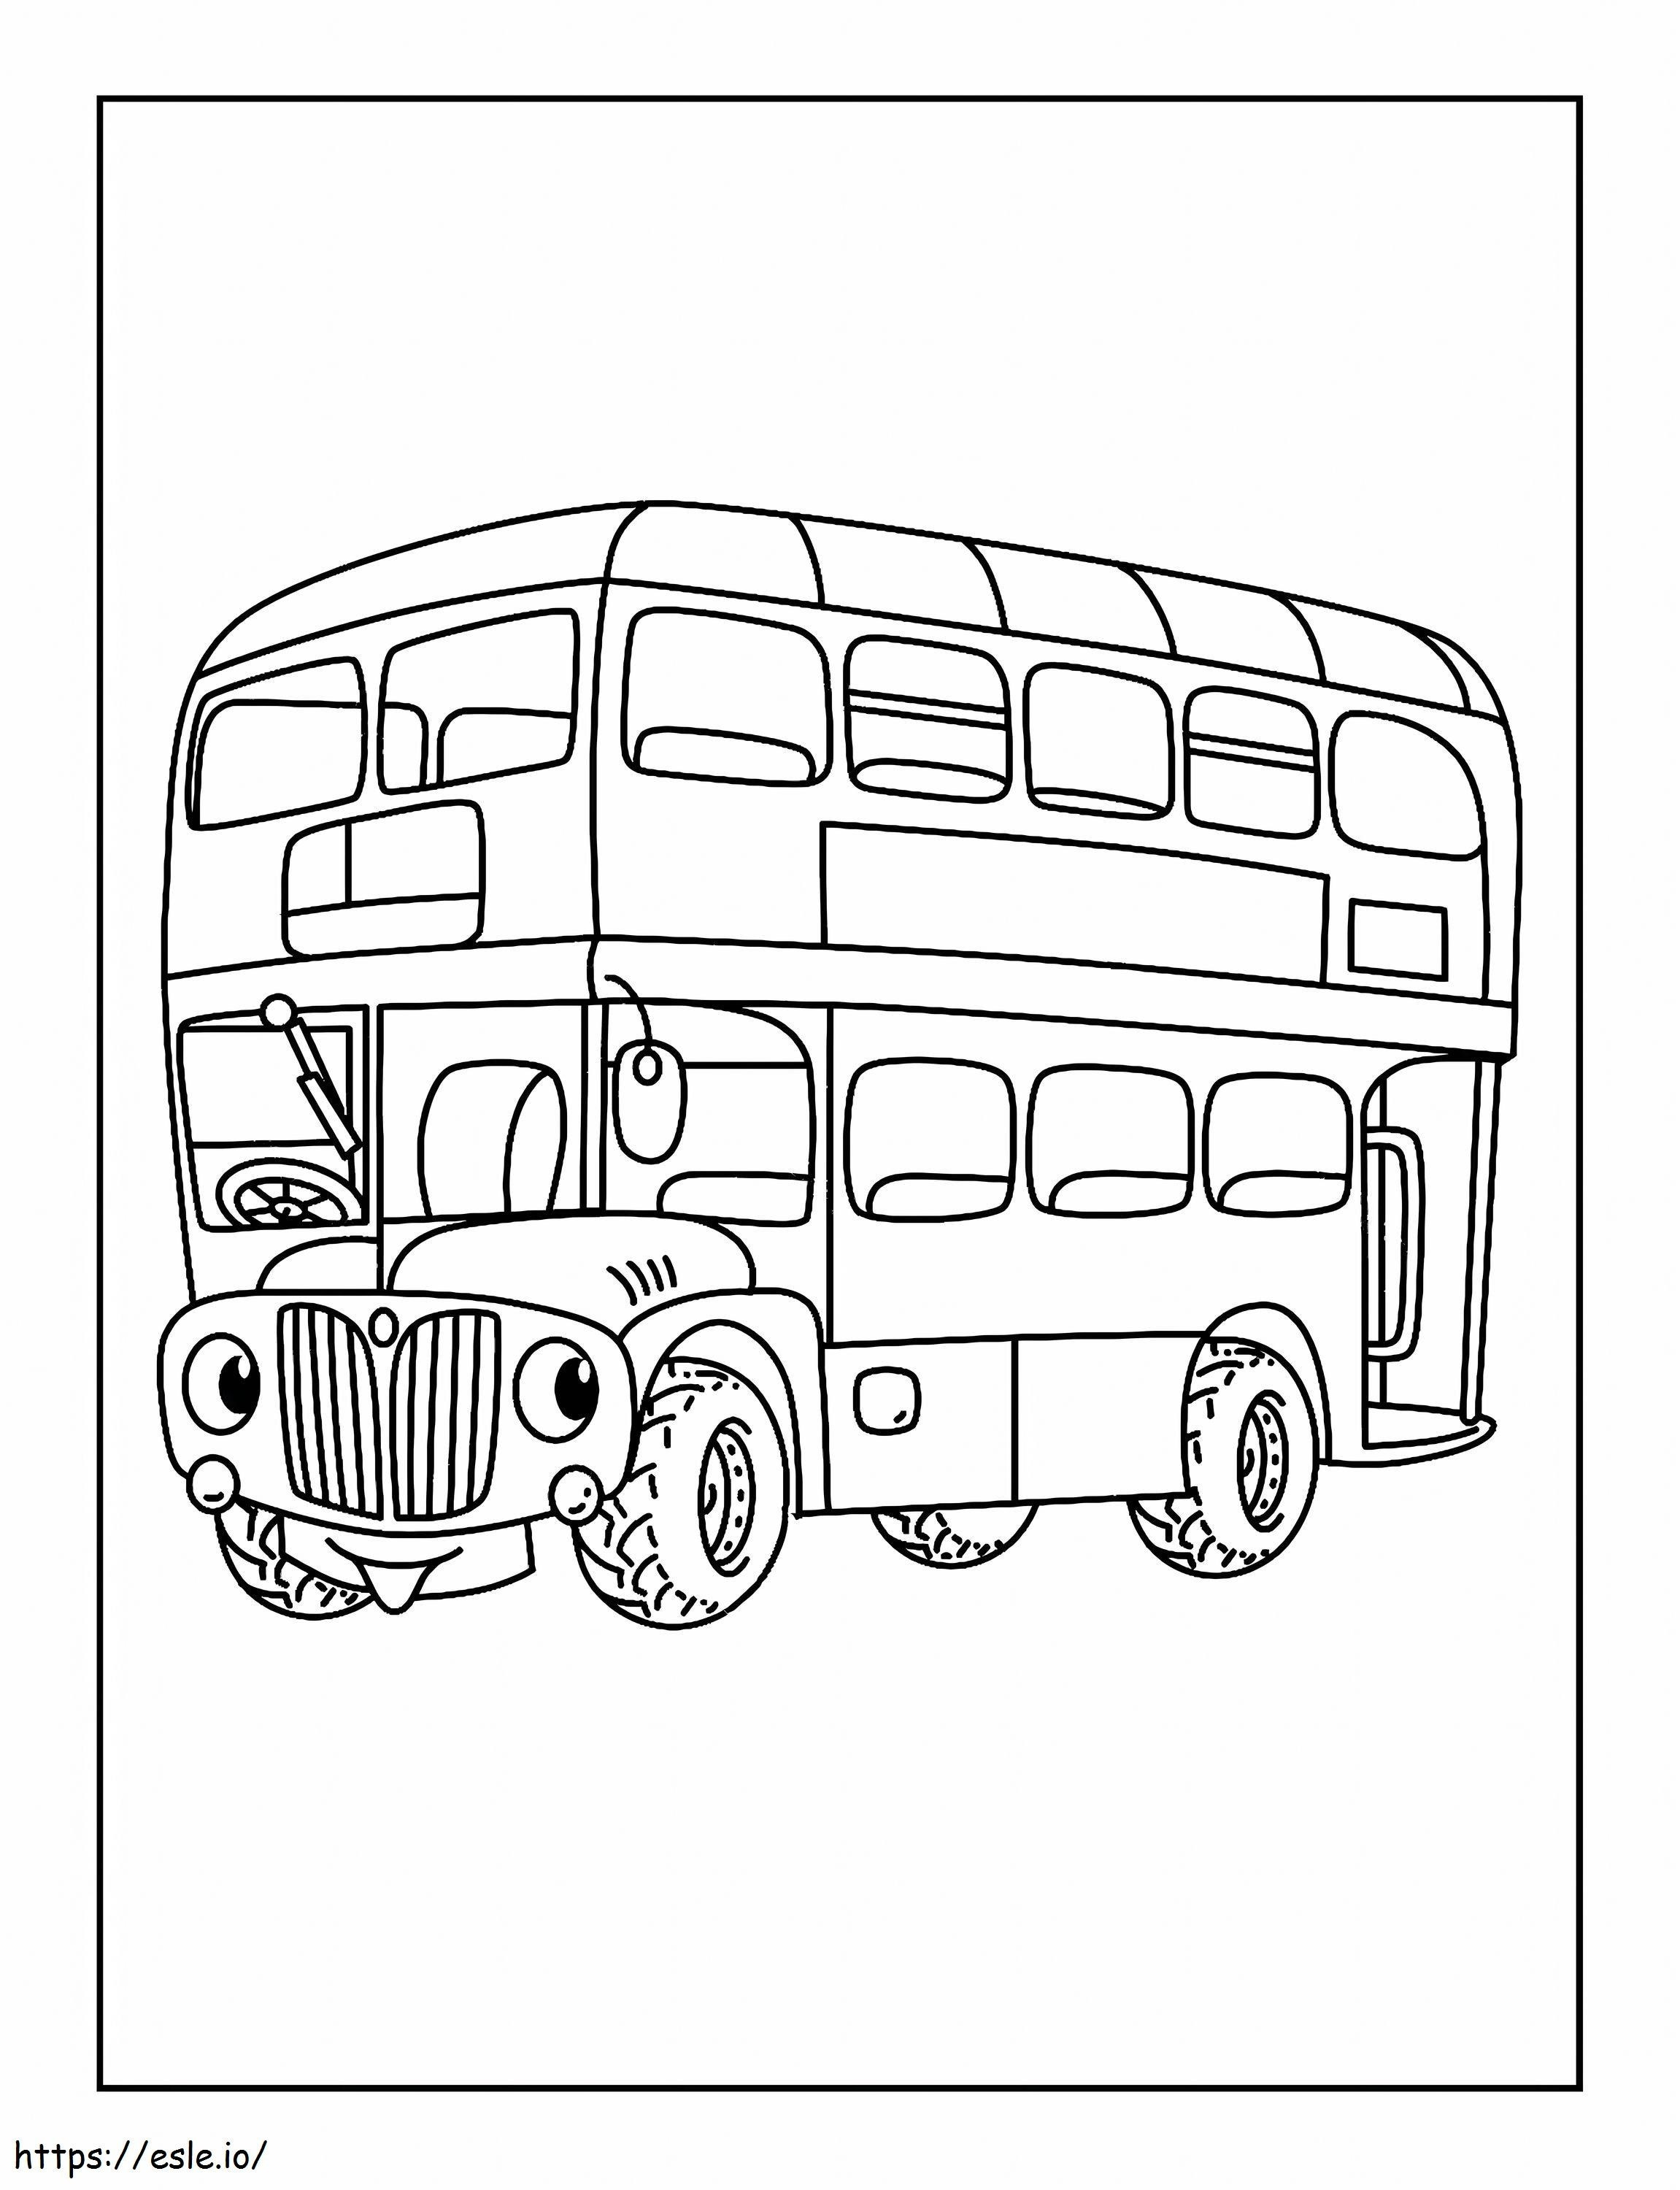 Scaled Bus Cartoon coloring page